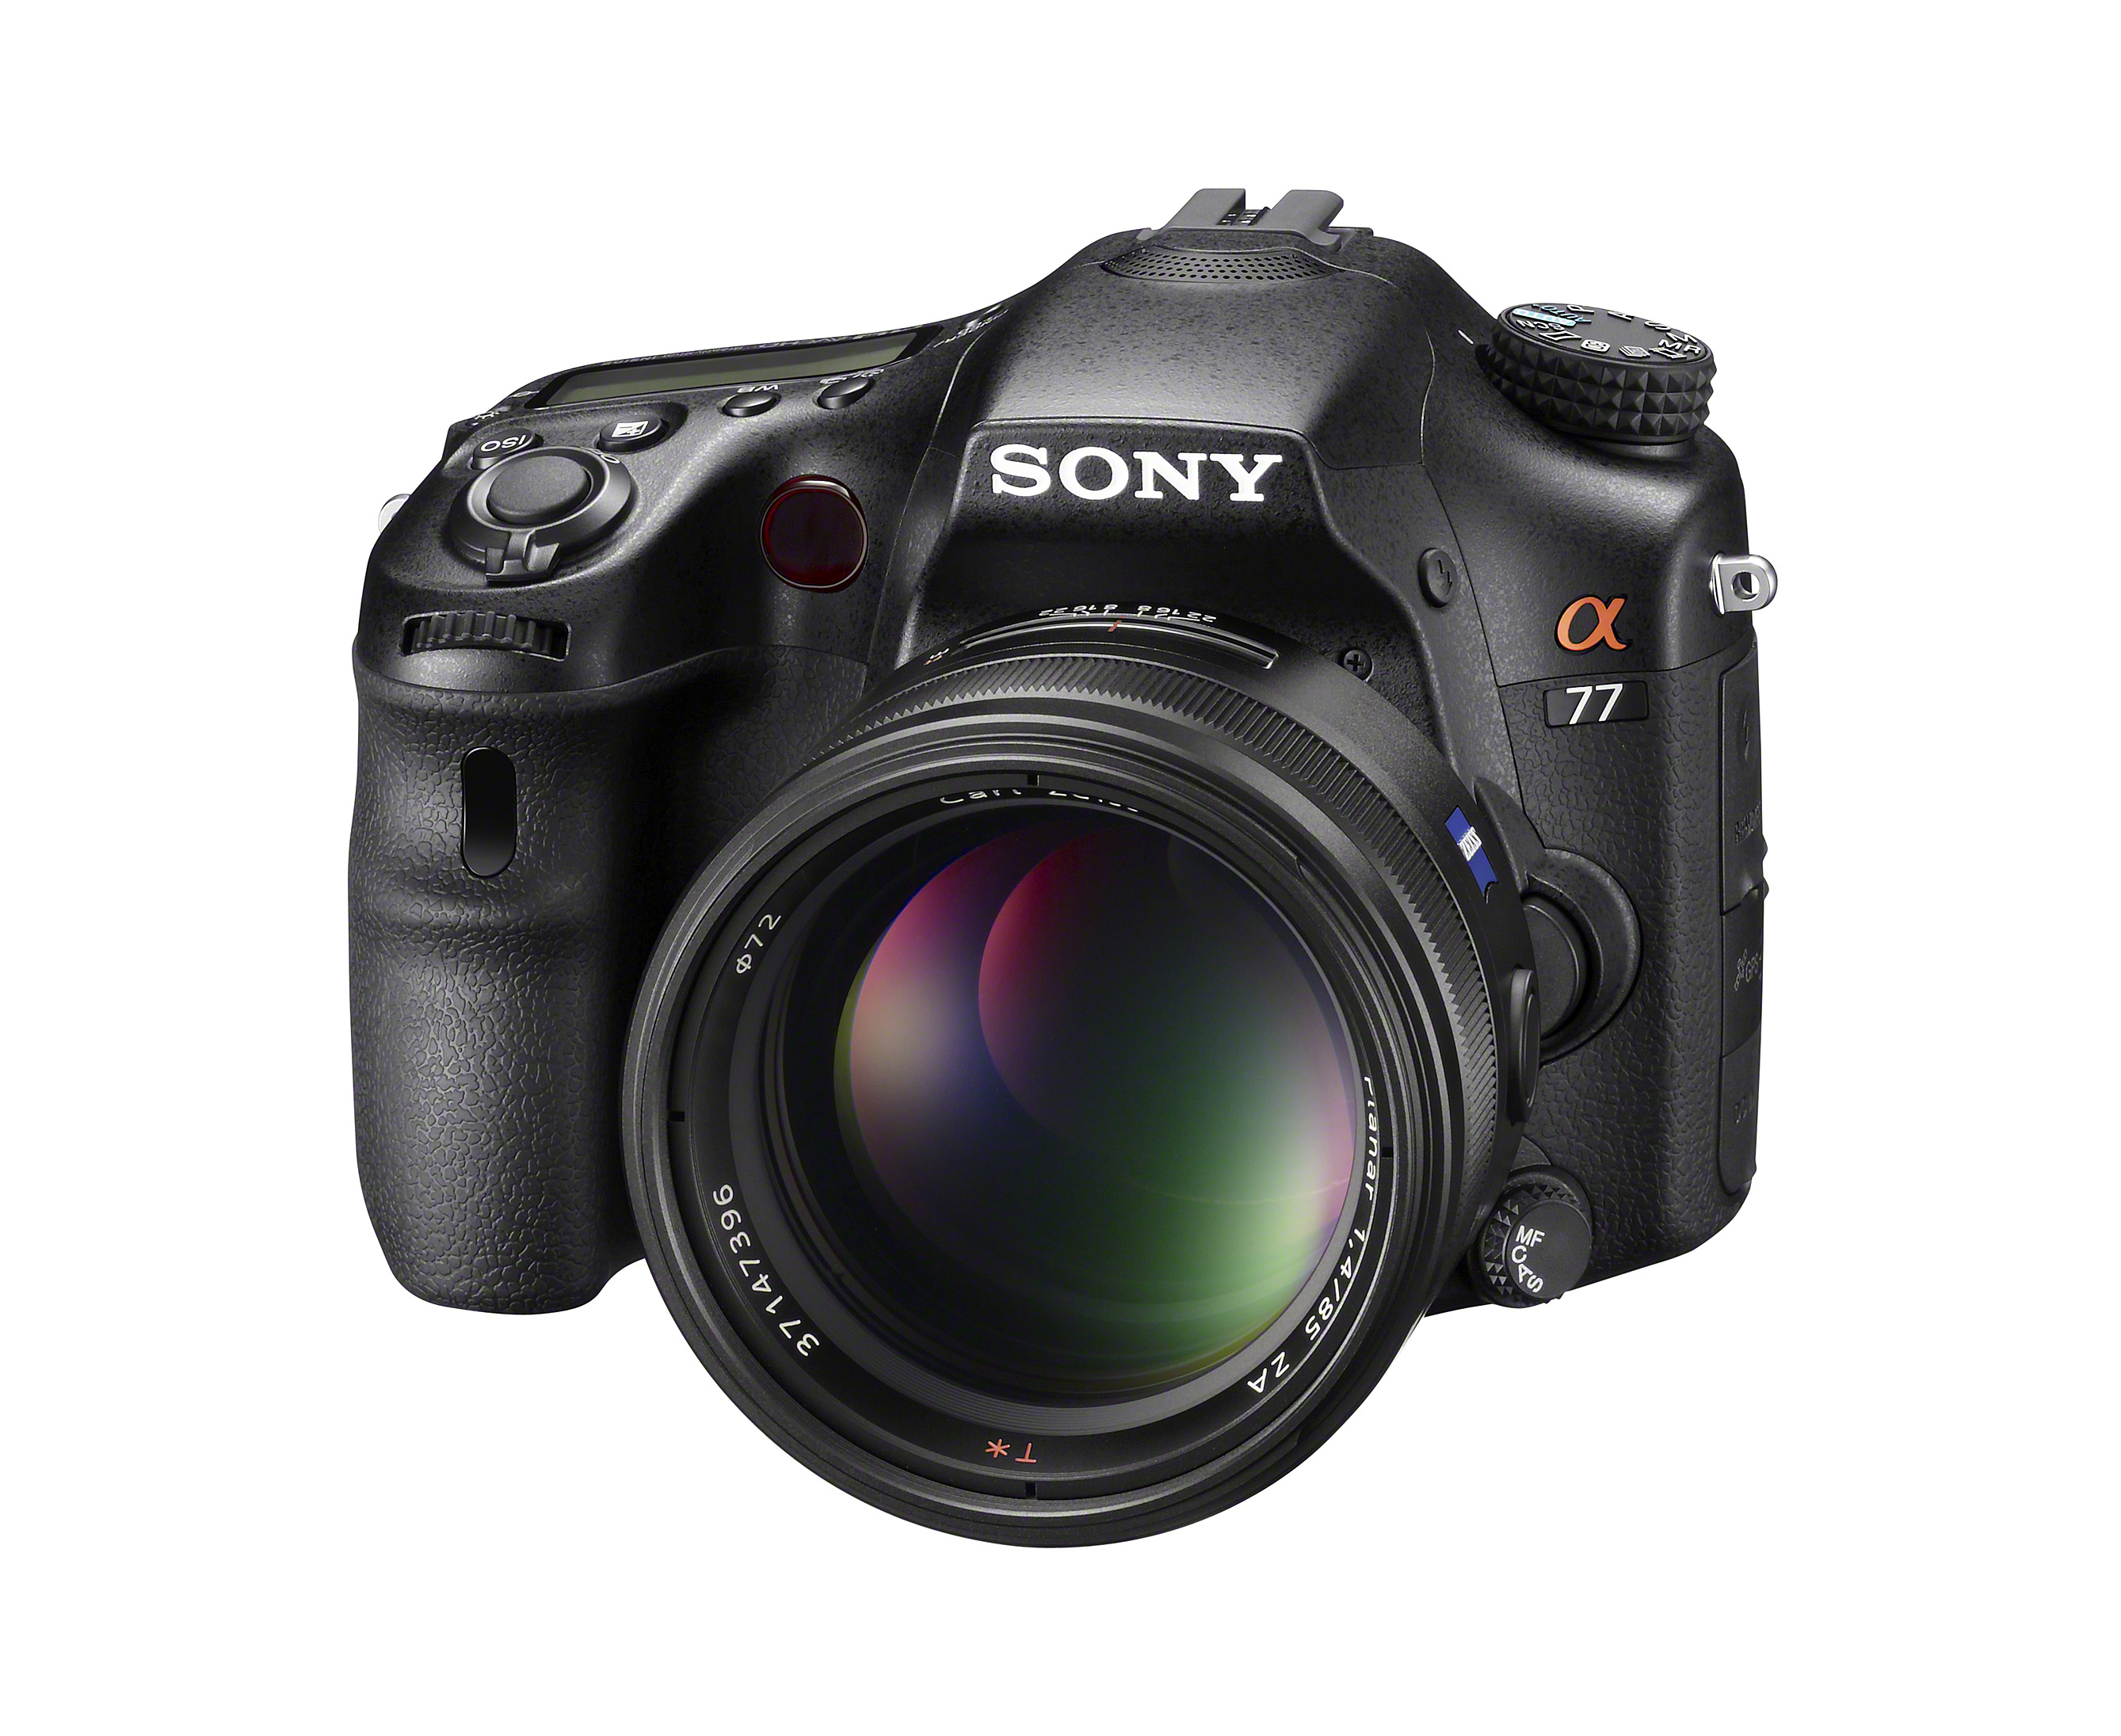 Sony cameras are perfect if you have a tight budget